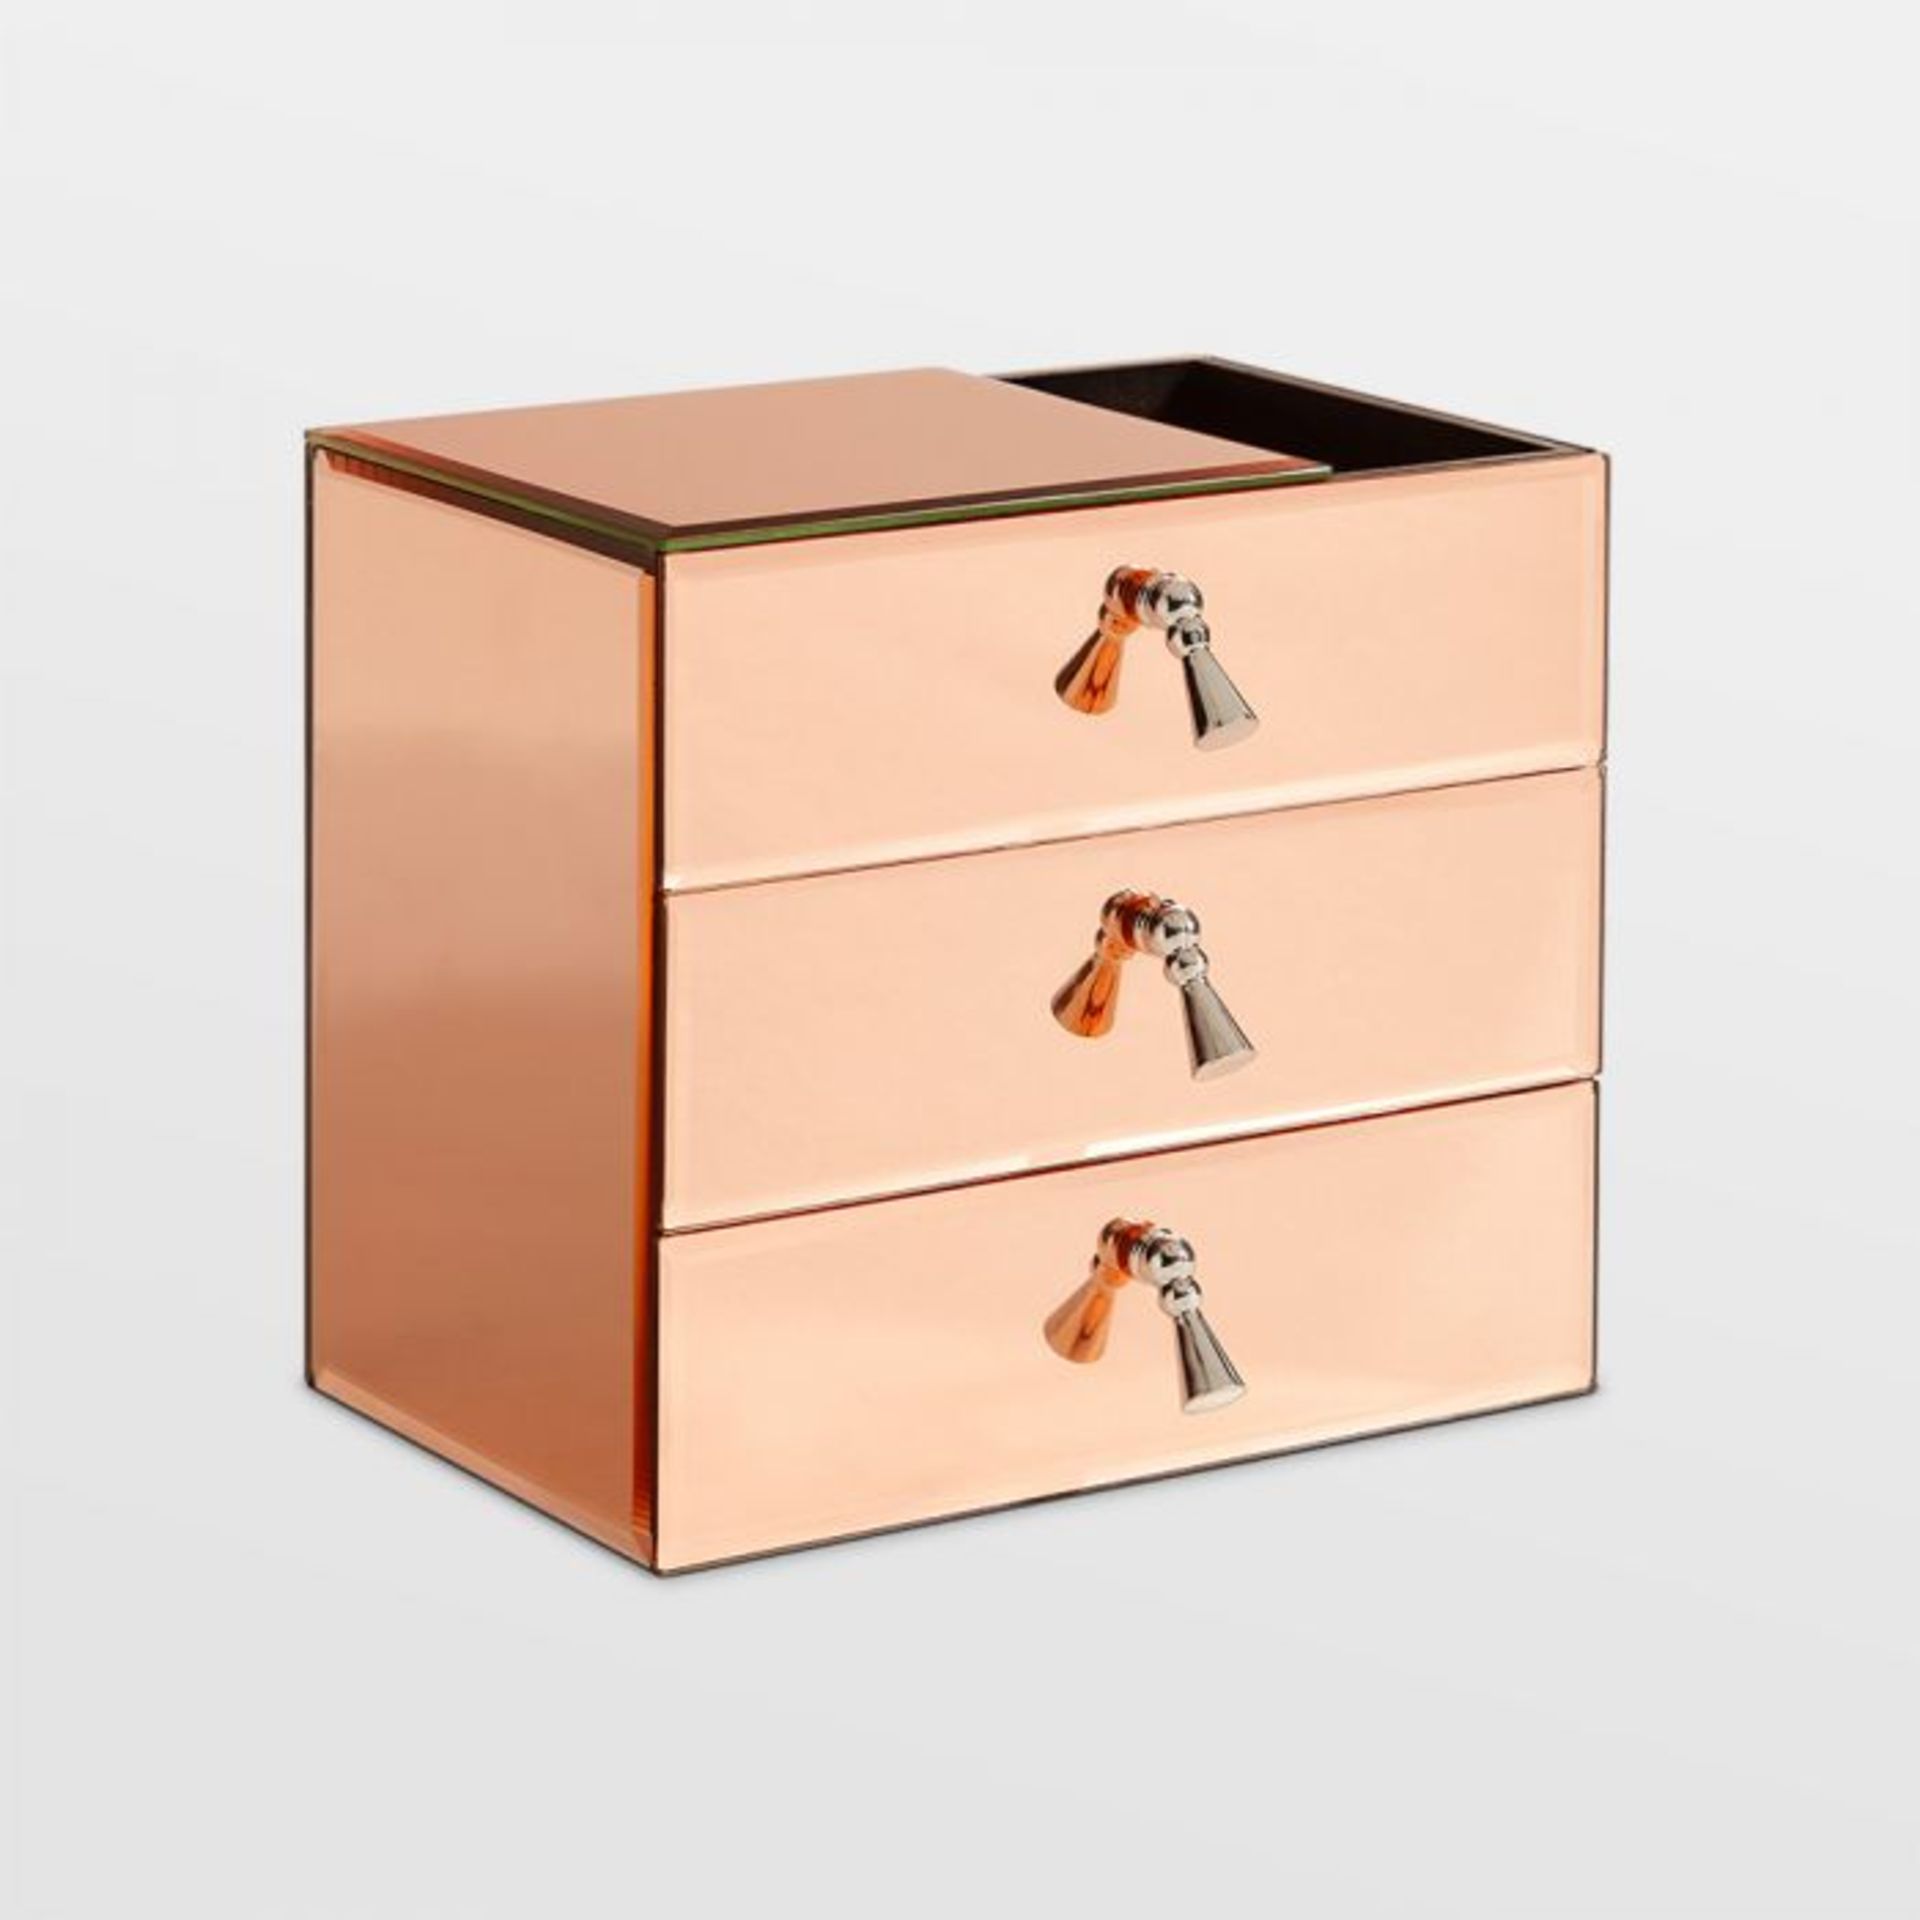 (V165) Rose Gold 3 Drawer Mirrored Jewellery Organiser. The perfect place to hide away clutter...